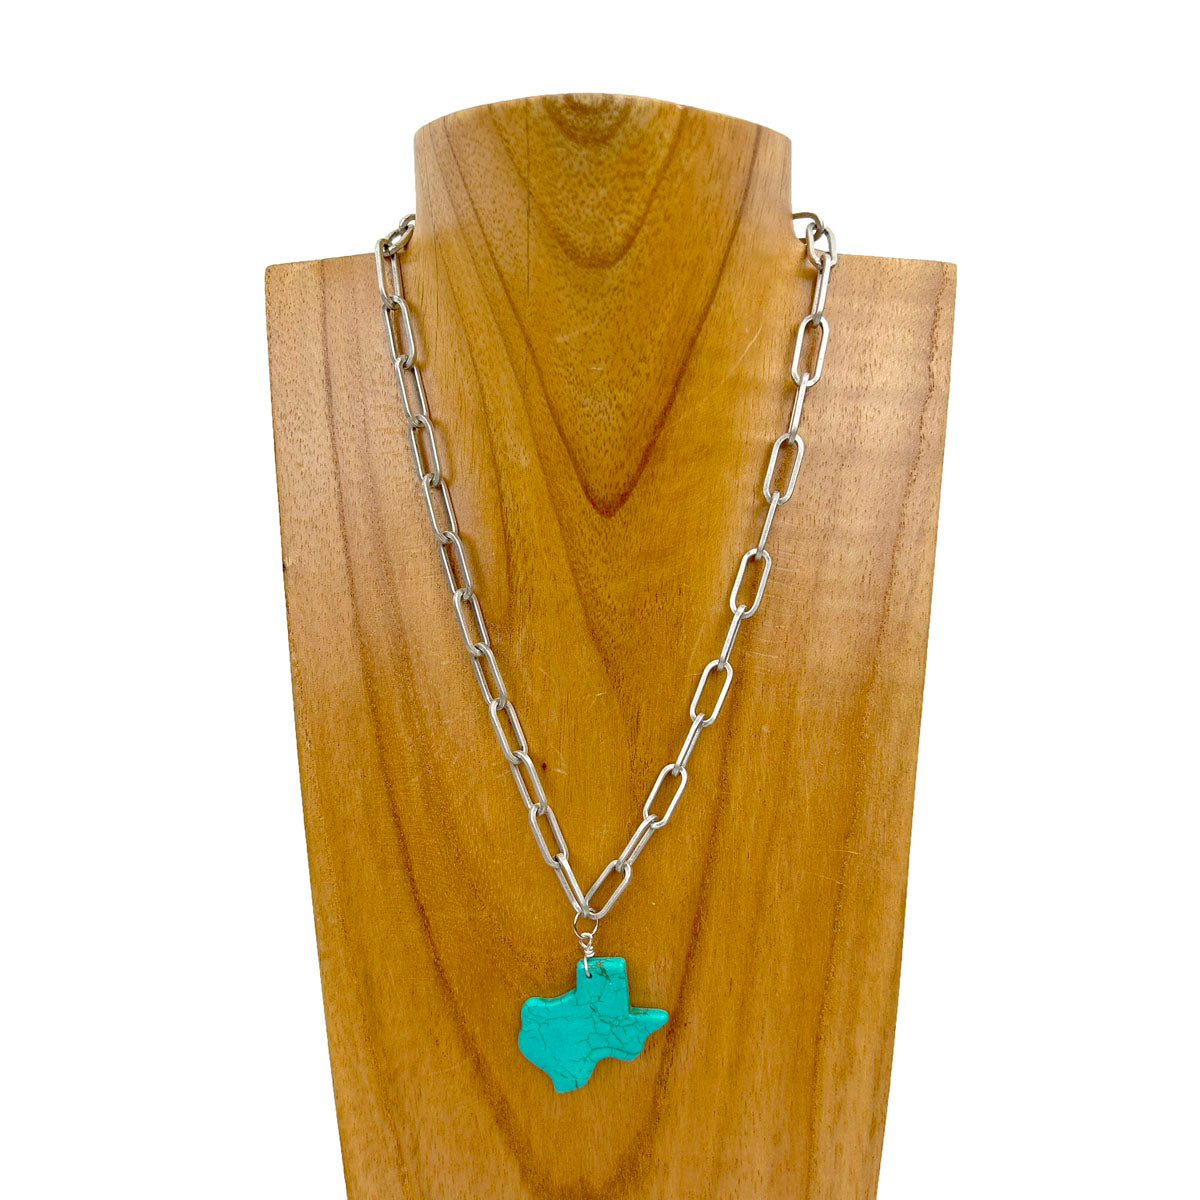 NKZ231112-19                  17 inches silver metal chain with blue turquoise stone TX map Necklace